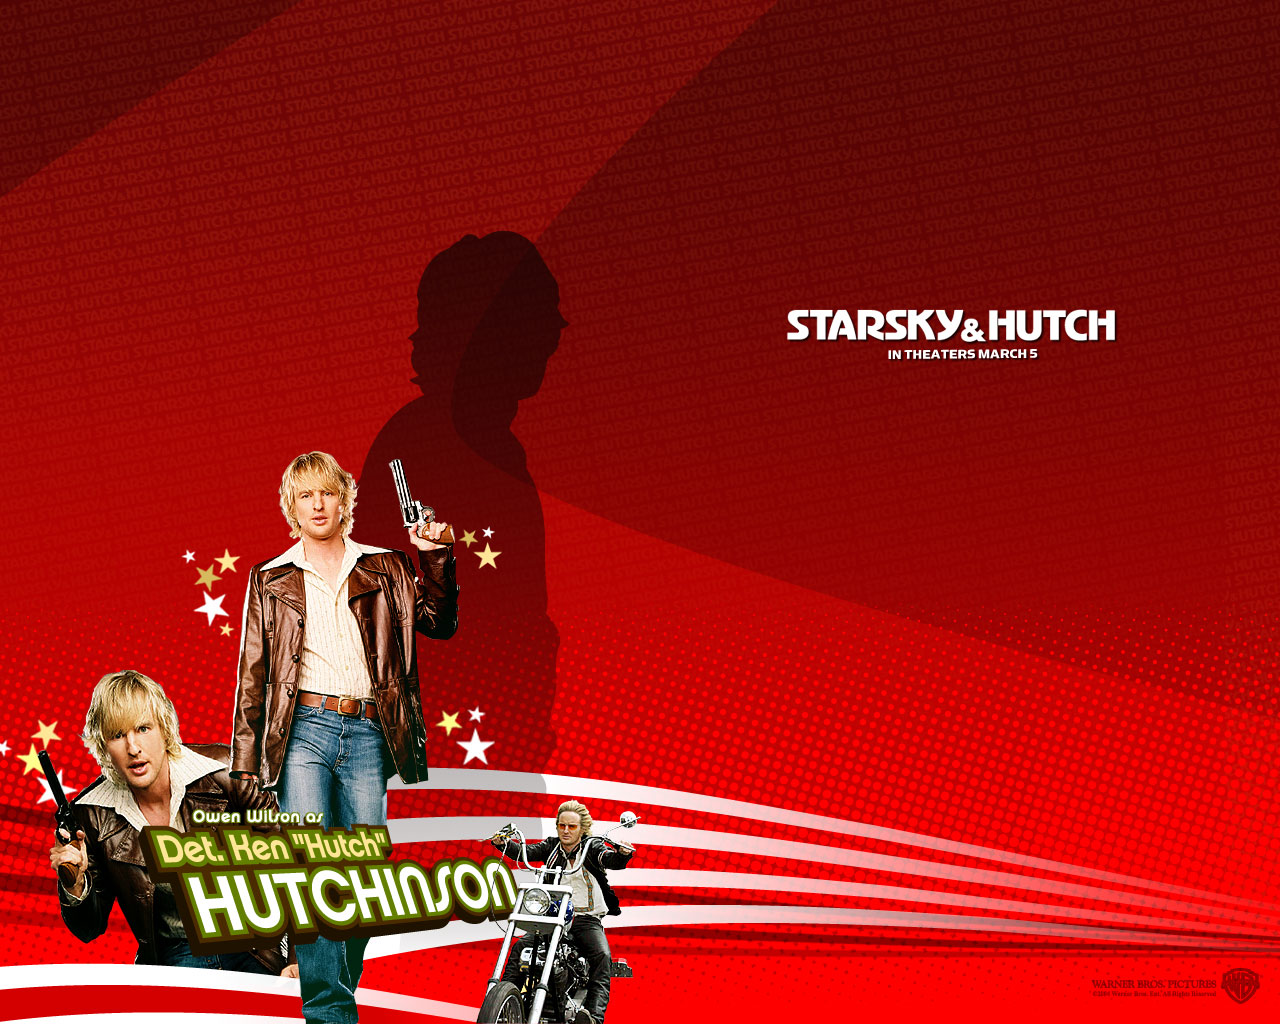 Download High quality Starsky And Hutch wallpaper / Movies / 1280x1024